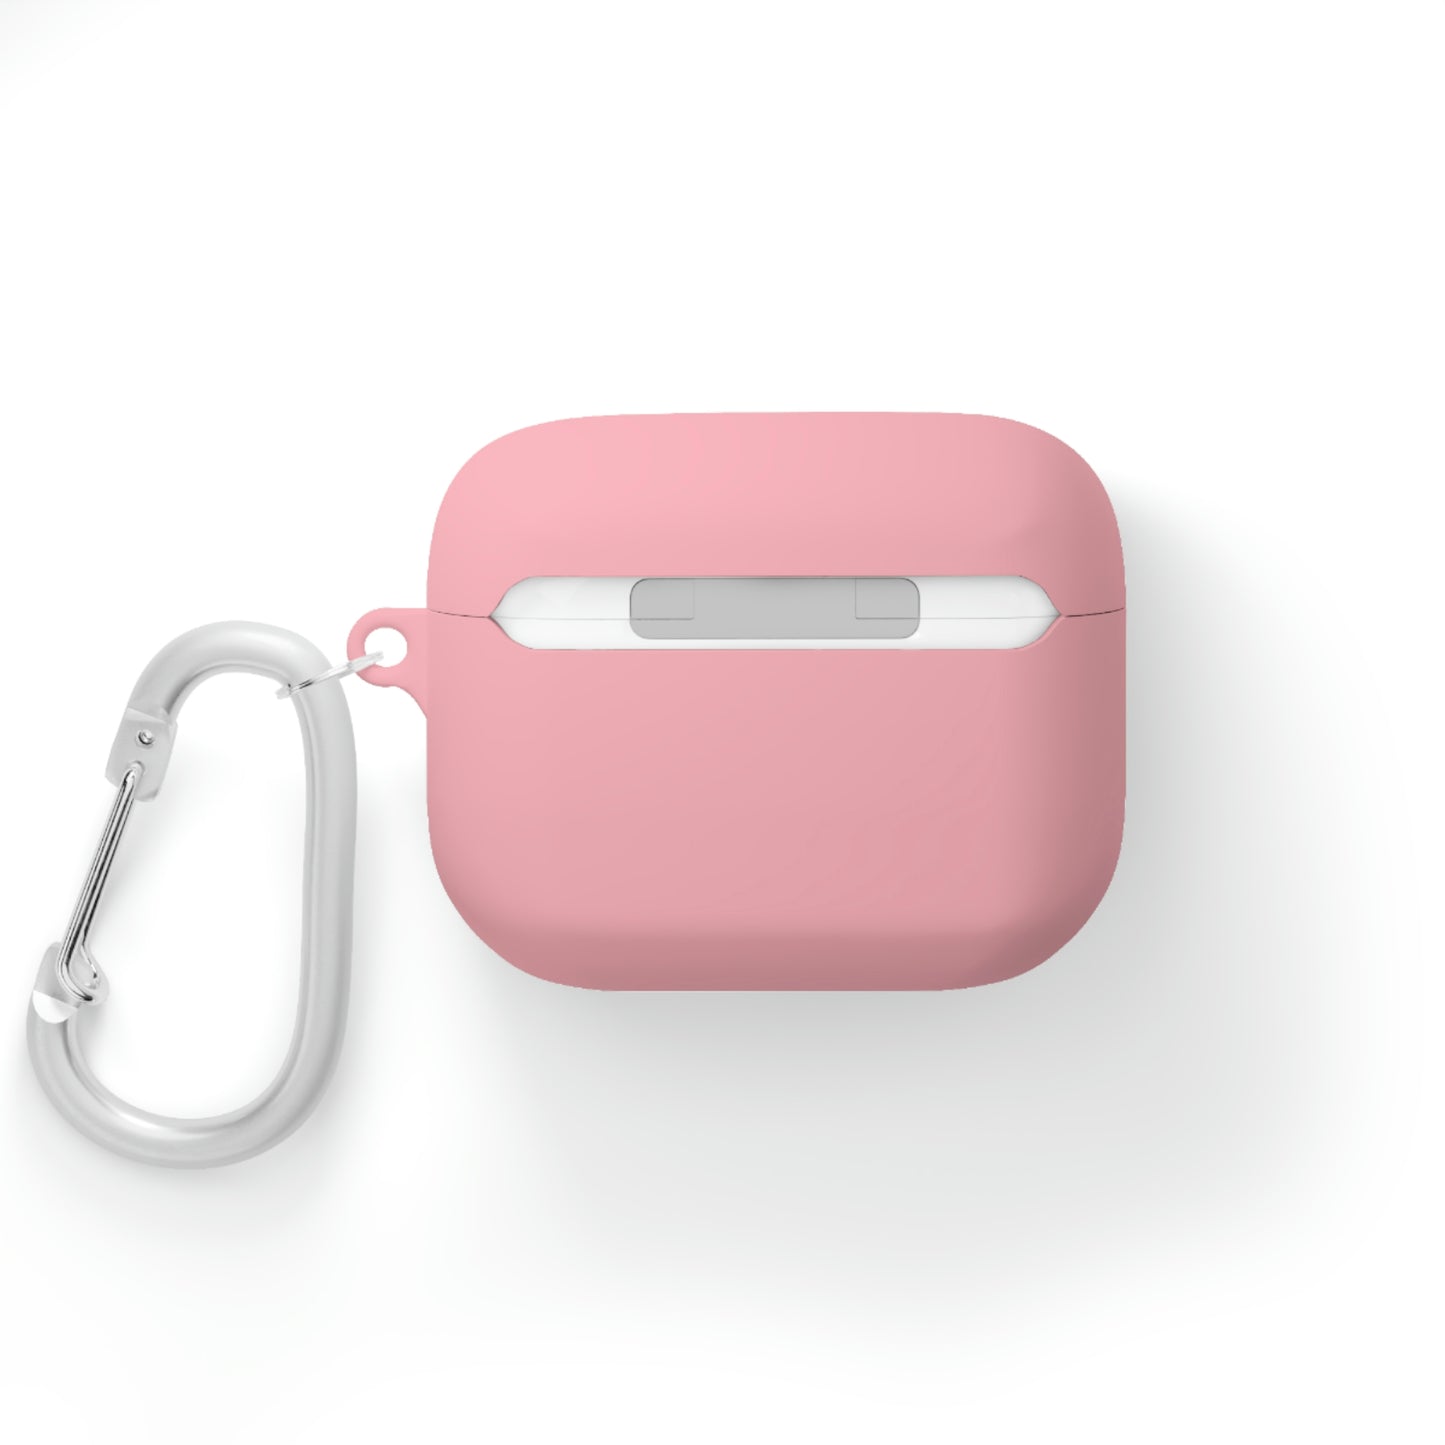 Fought For & Redeemed AirPods / Airpods Pro Case cover